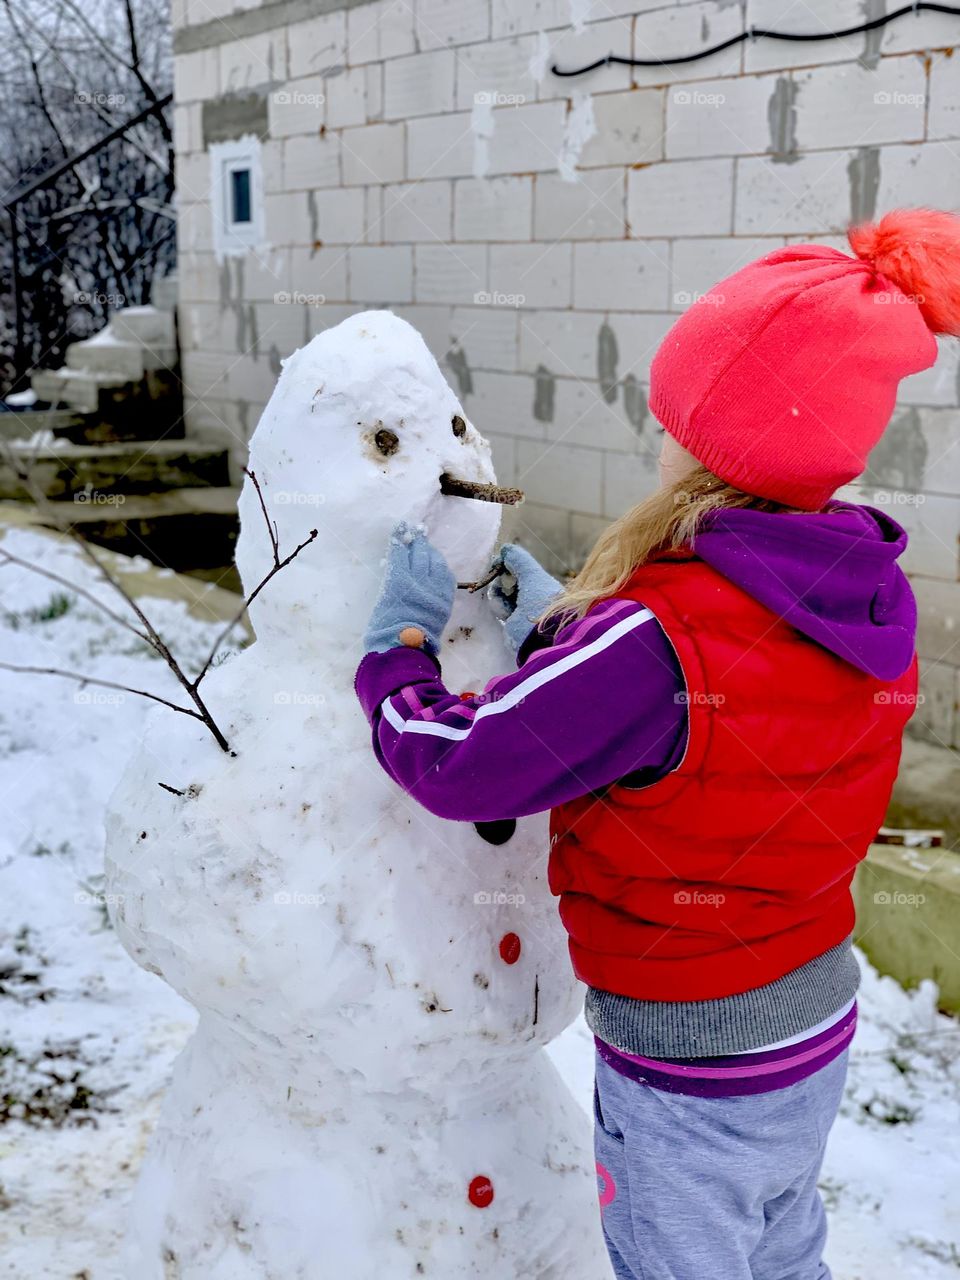 The little girl created this beautiful snowman !